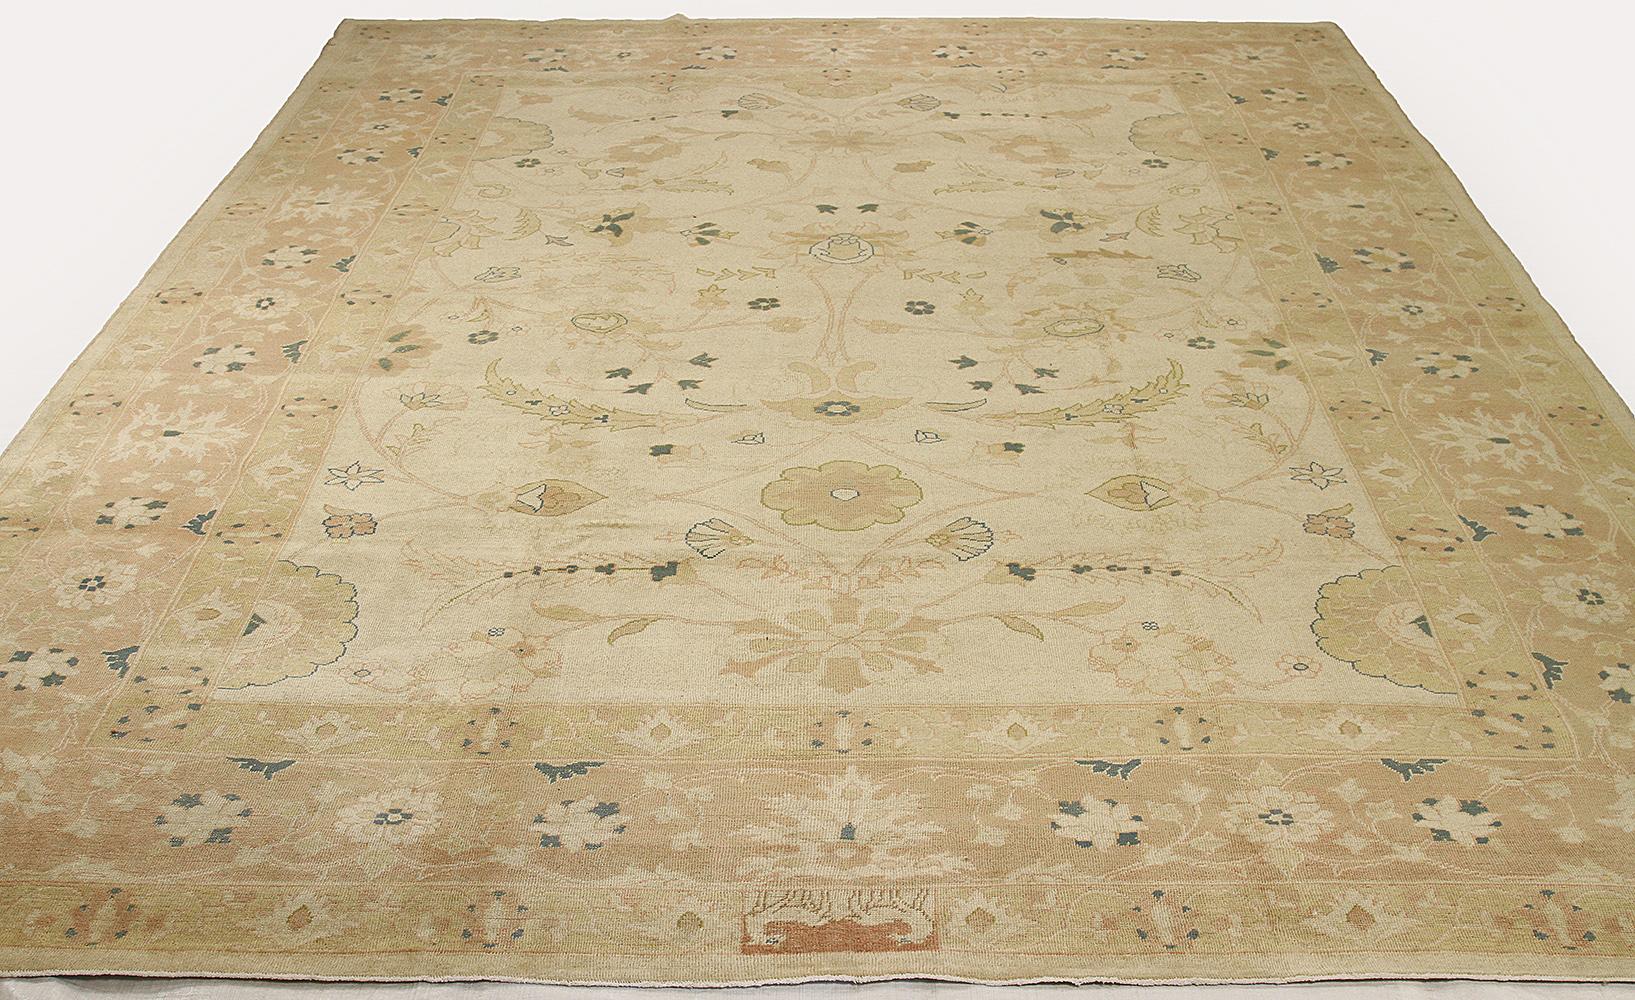 New handmade Persian area rug from high quality sheep’s wool and colored with eco-friendly vegetable dyes that are proven safe for humans and pets alike. It’s a traditional Sultanabad design showcasing a regal ivory field with prominent Herati